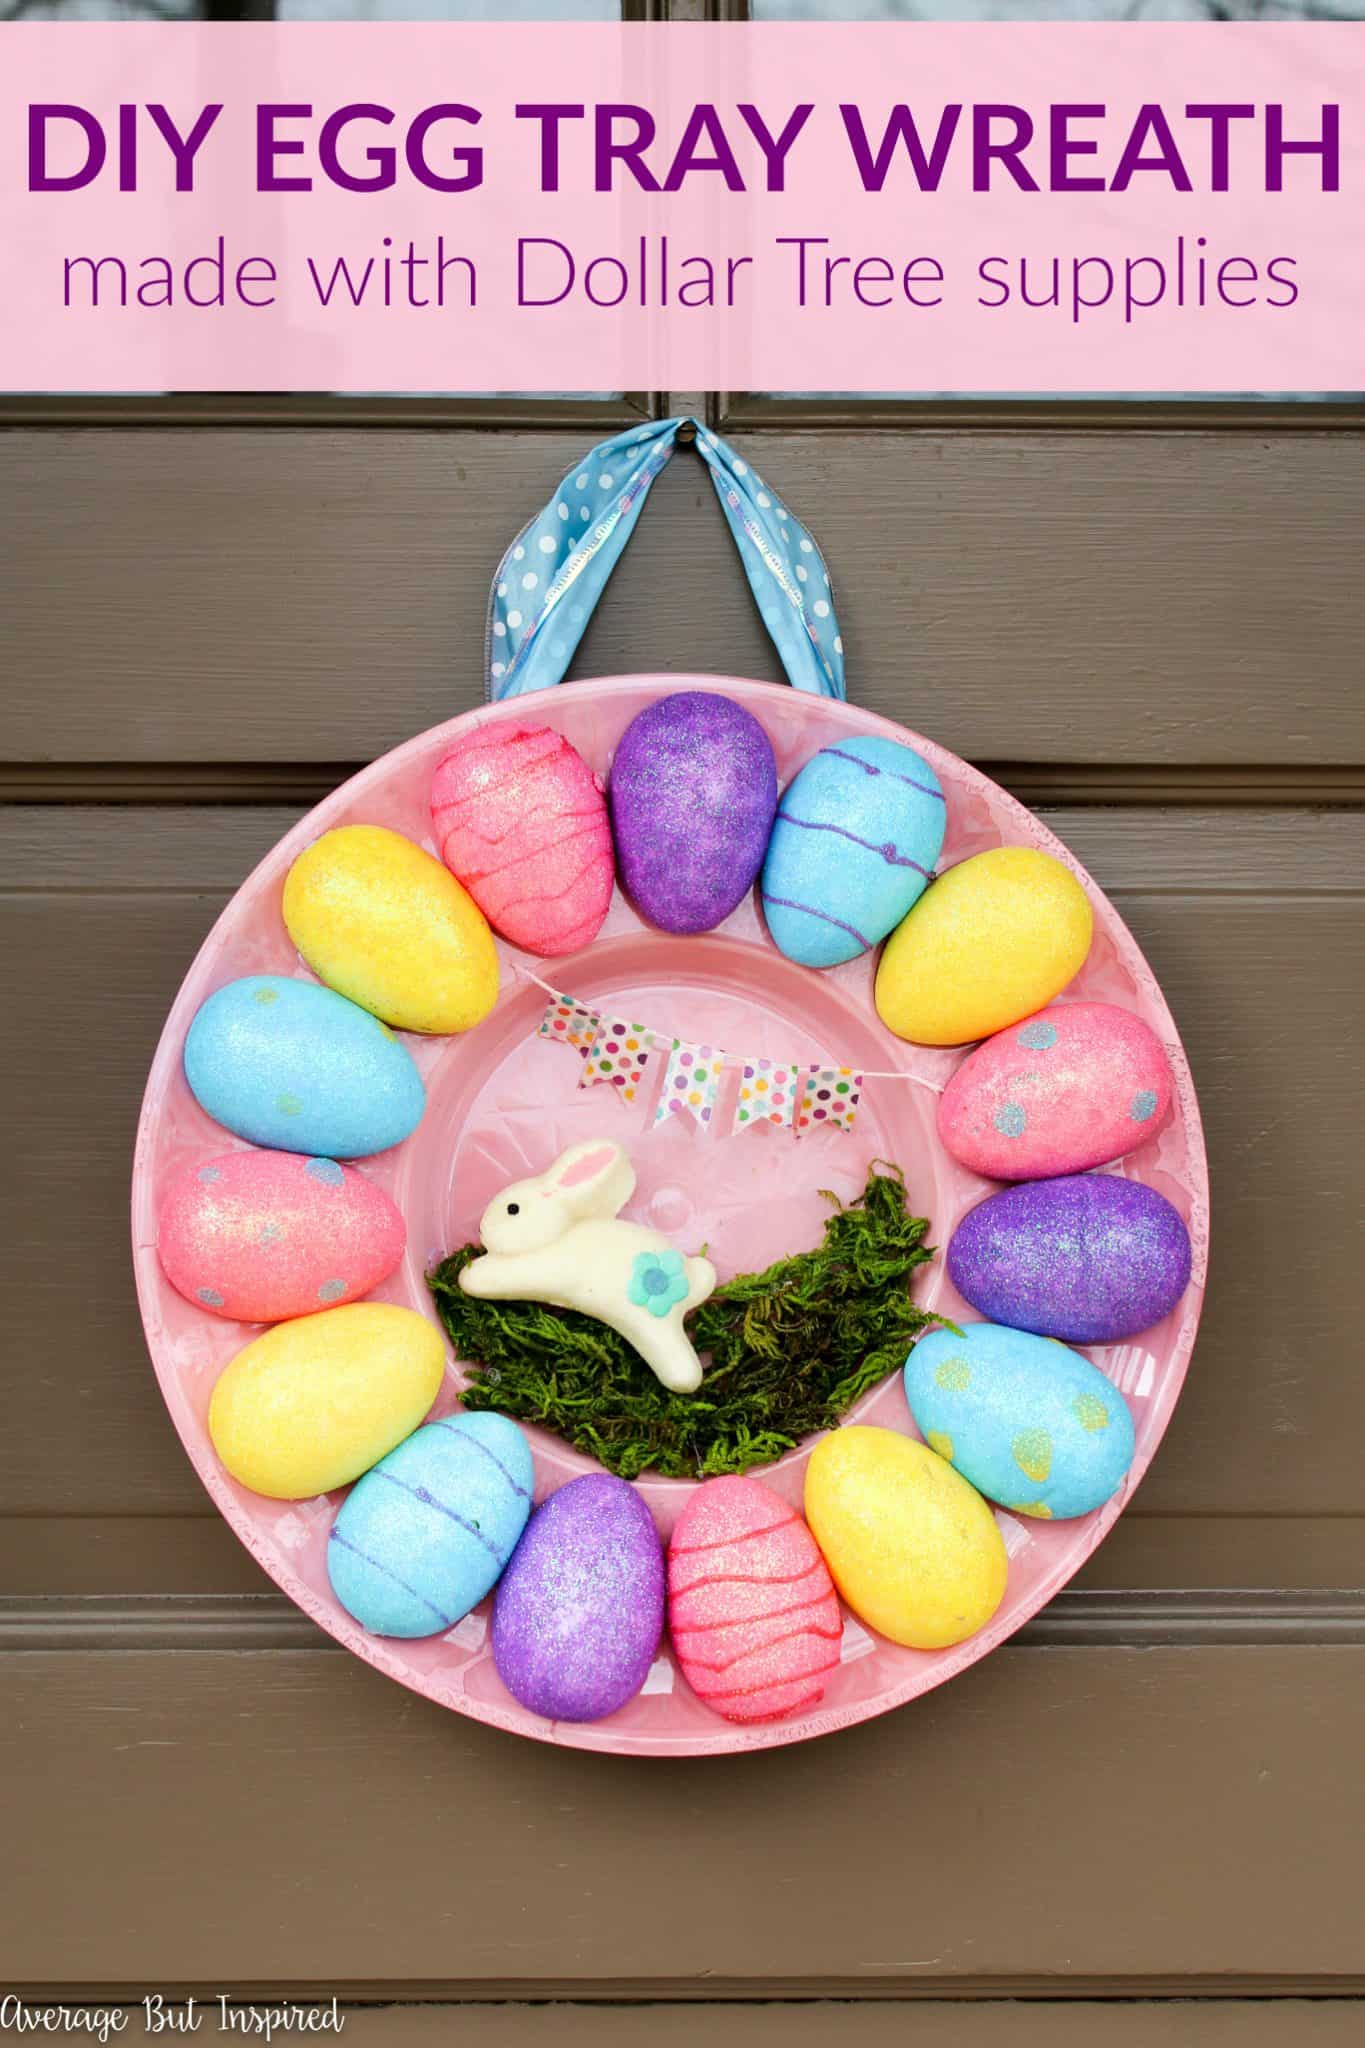 SO CUTE! Turn a plastic deviled egg tray into an adorable Easter wreath or Spring wreath! Get the full tutorial for this Dollar Tree Easter Wreath in this post!